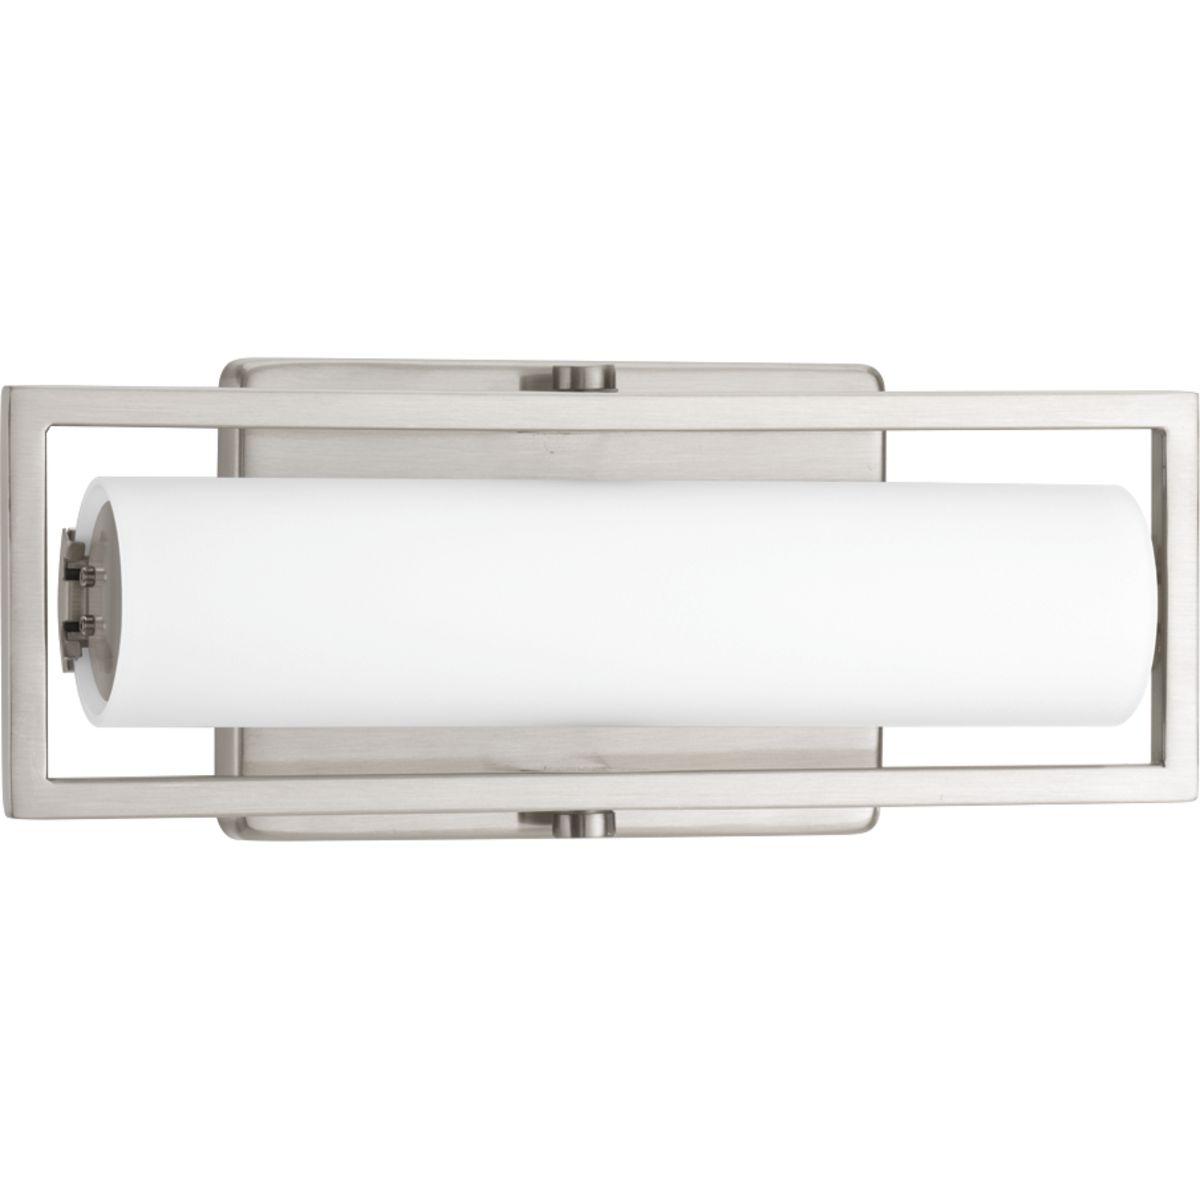 Hubbell P2781-0930K9 Modern architectural styling frames with an integrated LED source and circular etched opal glass. For increased design options, fixtures can be installed horizontally or vertically. Frame 12" bath and vanity fixture provides beautiful and continuous illum